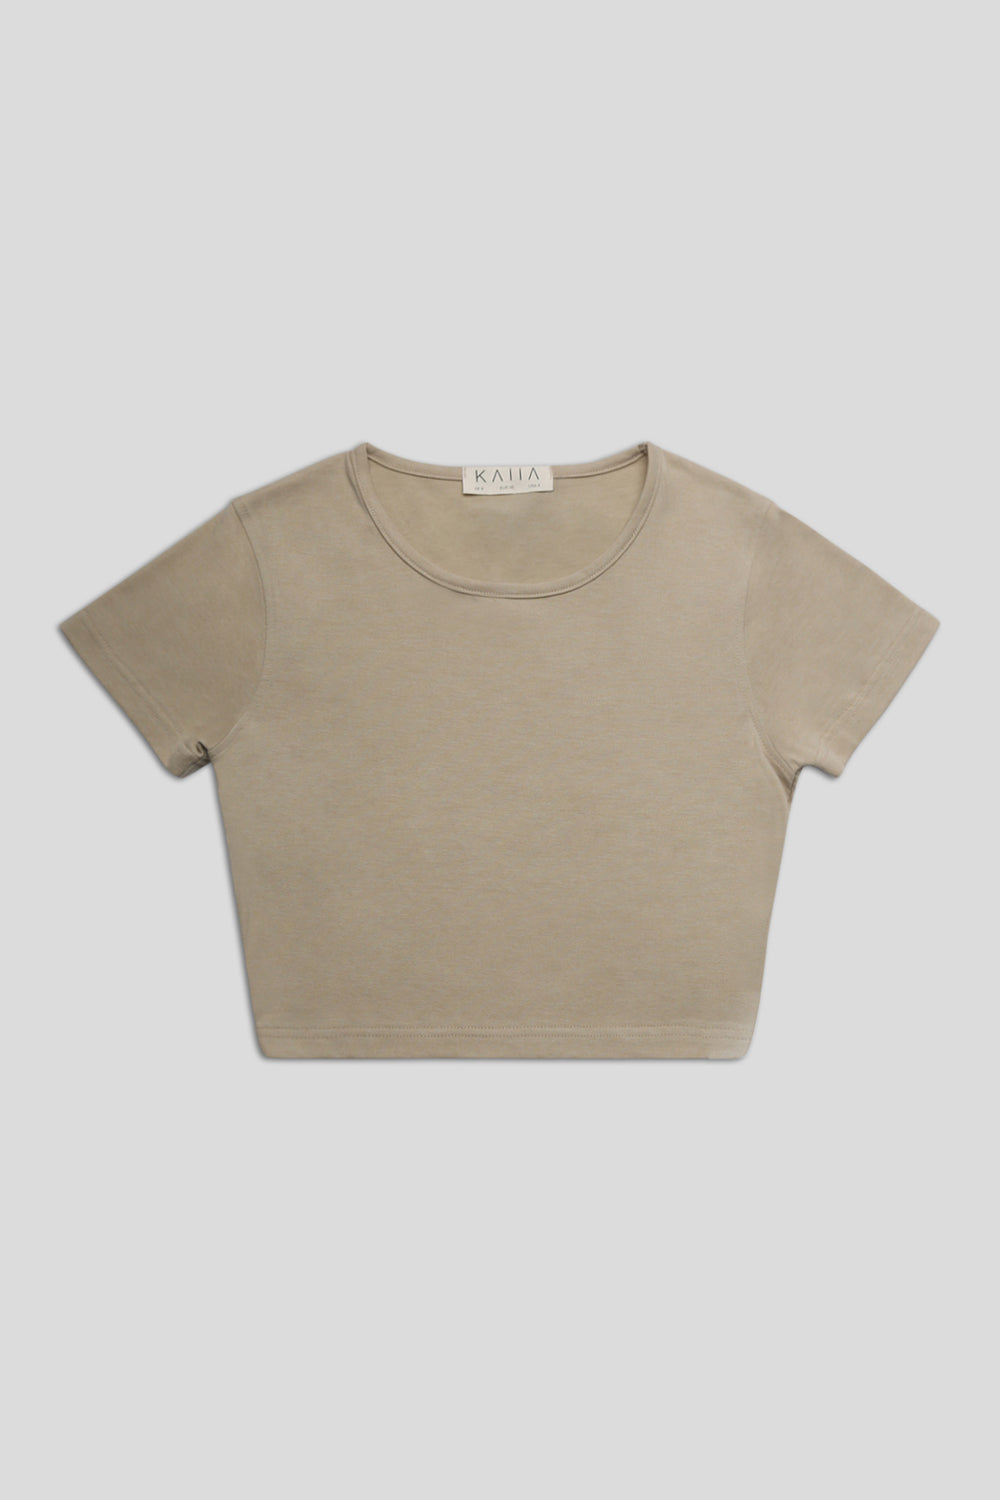 Fitted T-Shirt Stone UK 14 product